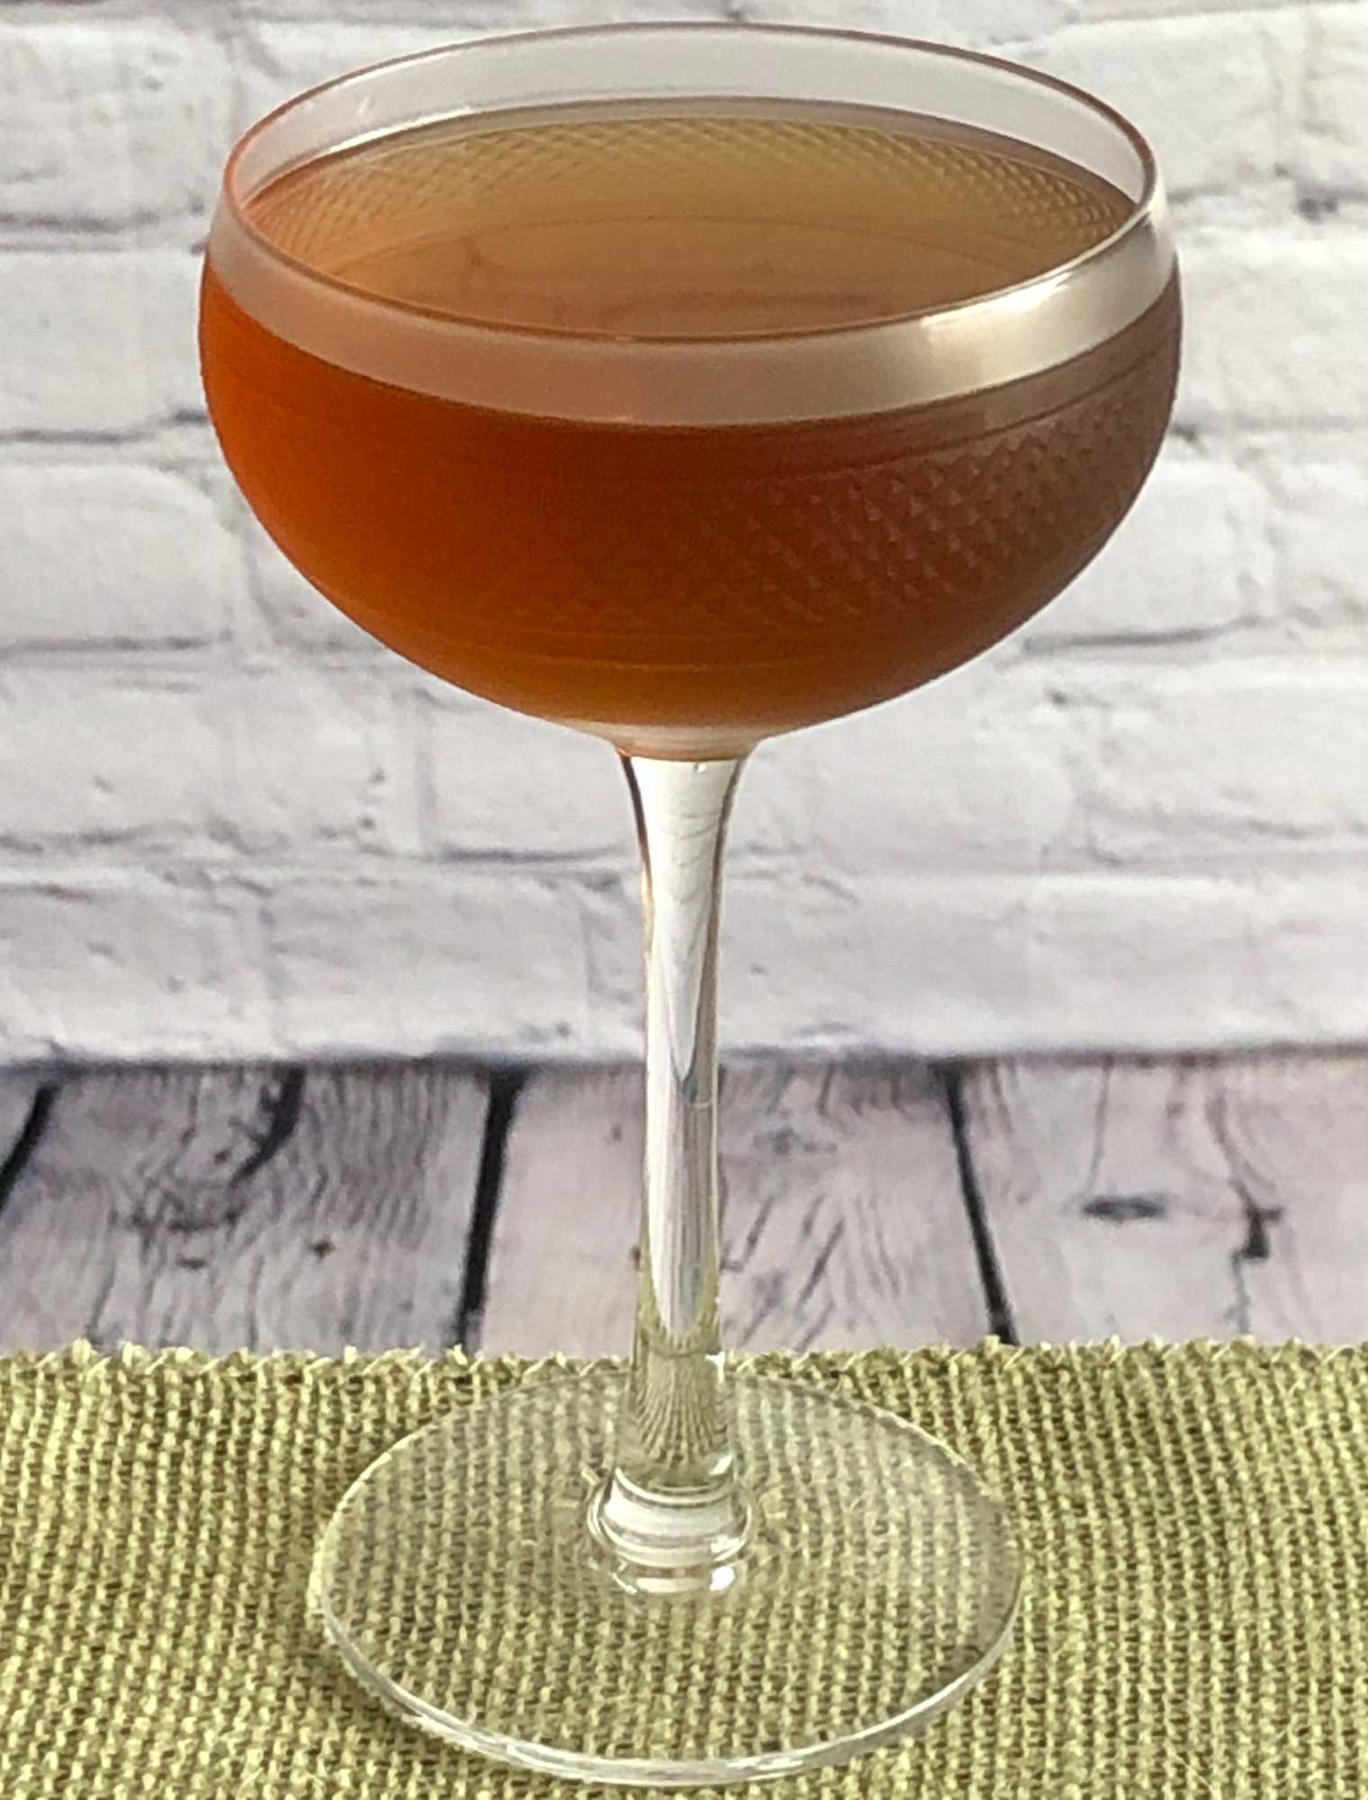 An example of the Hanky Panky, the mixed drink (drink) featuring Hayman’s London Dry Gin, Dolin Rouge Vermouth de Chambéry, Elisir Novasalus, and orange bitters; photo by Lee Edwards